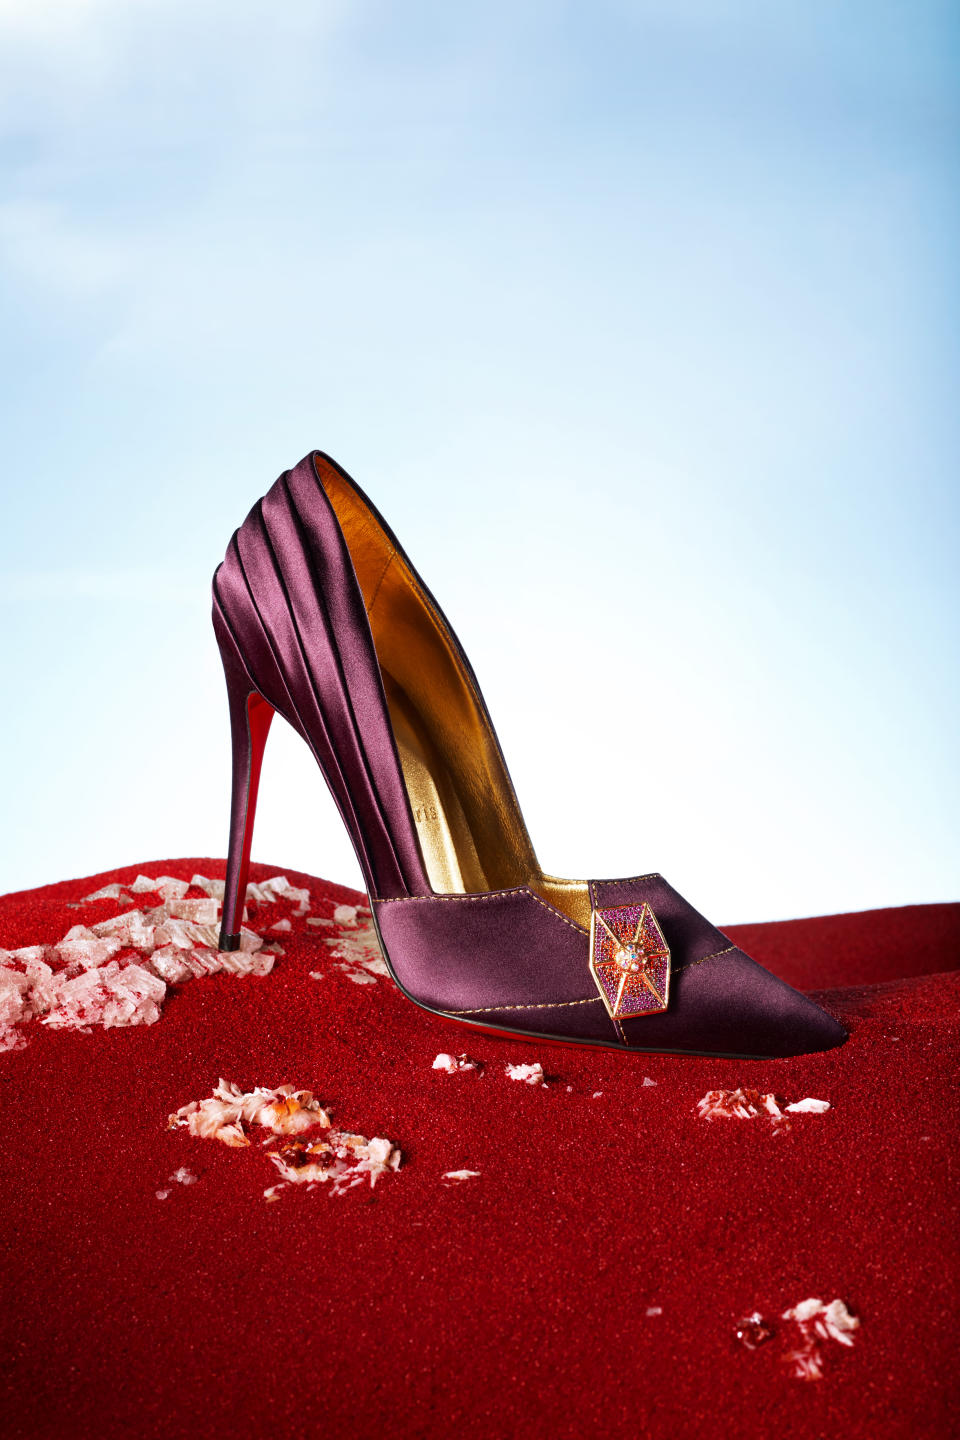 The Admiral Holdo shoe from Christian Louboutin’s collection for <i>Star Wars: The Last Jedi</i>. (Photo: Guillaume Fandel for Disney)